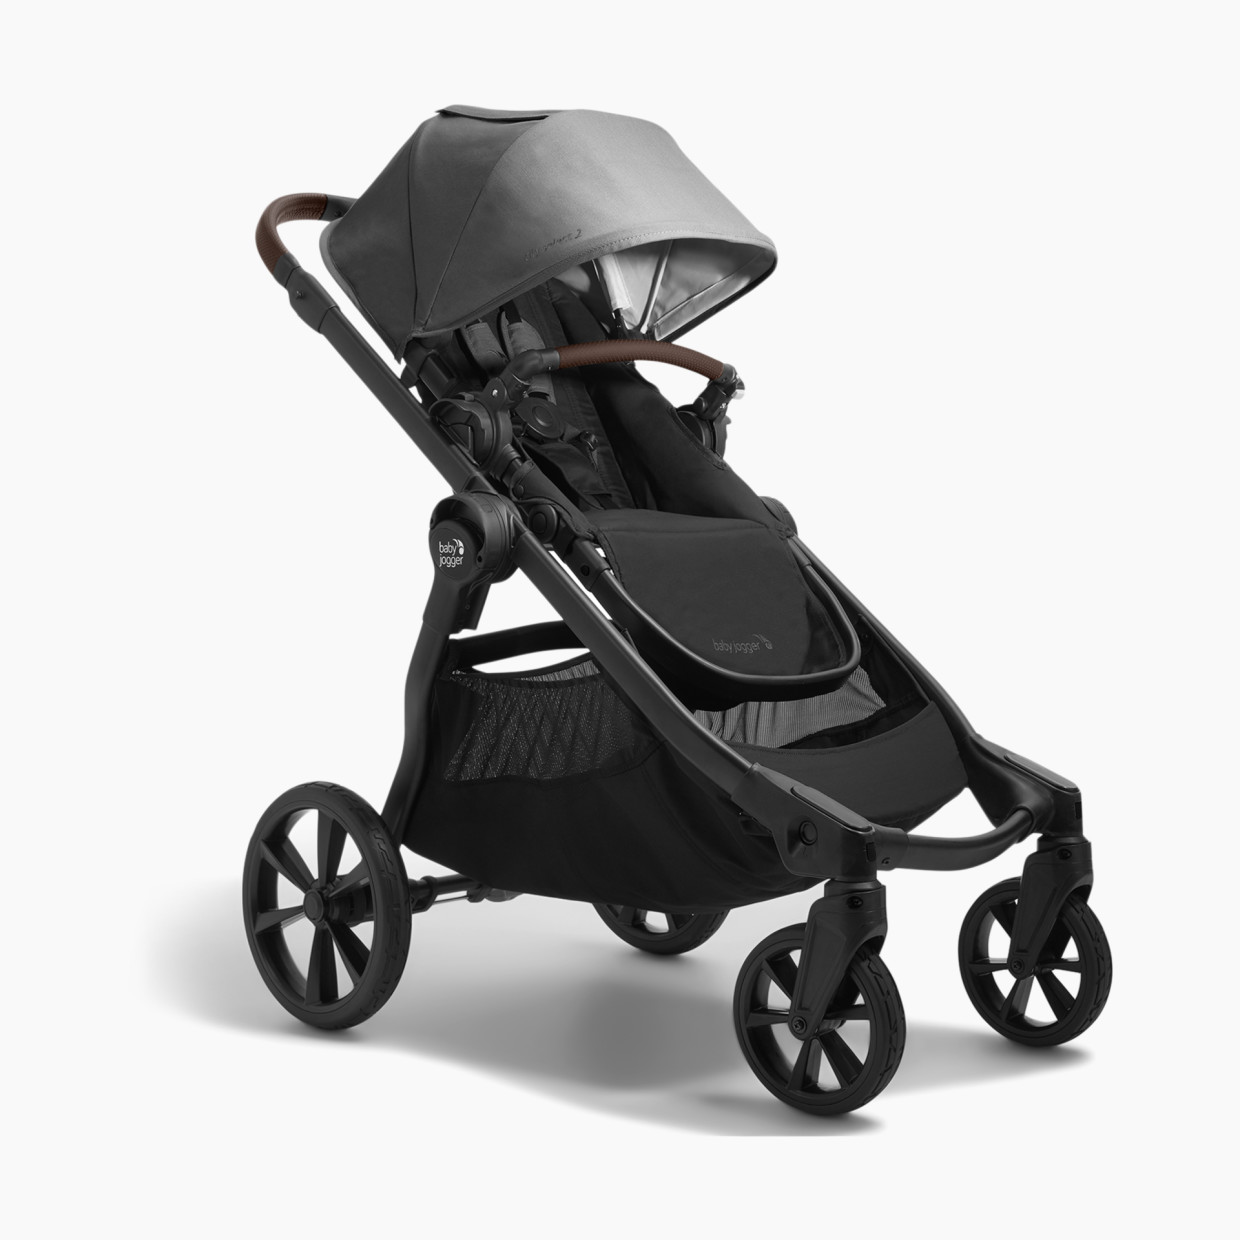 Baby Jogger City Select 2 Stroller, Eco Collection - Harbor Grey.